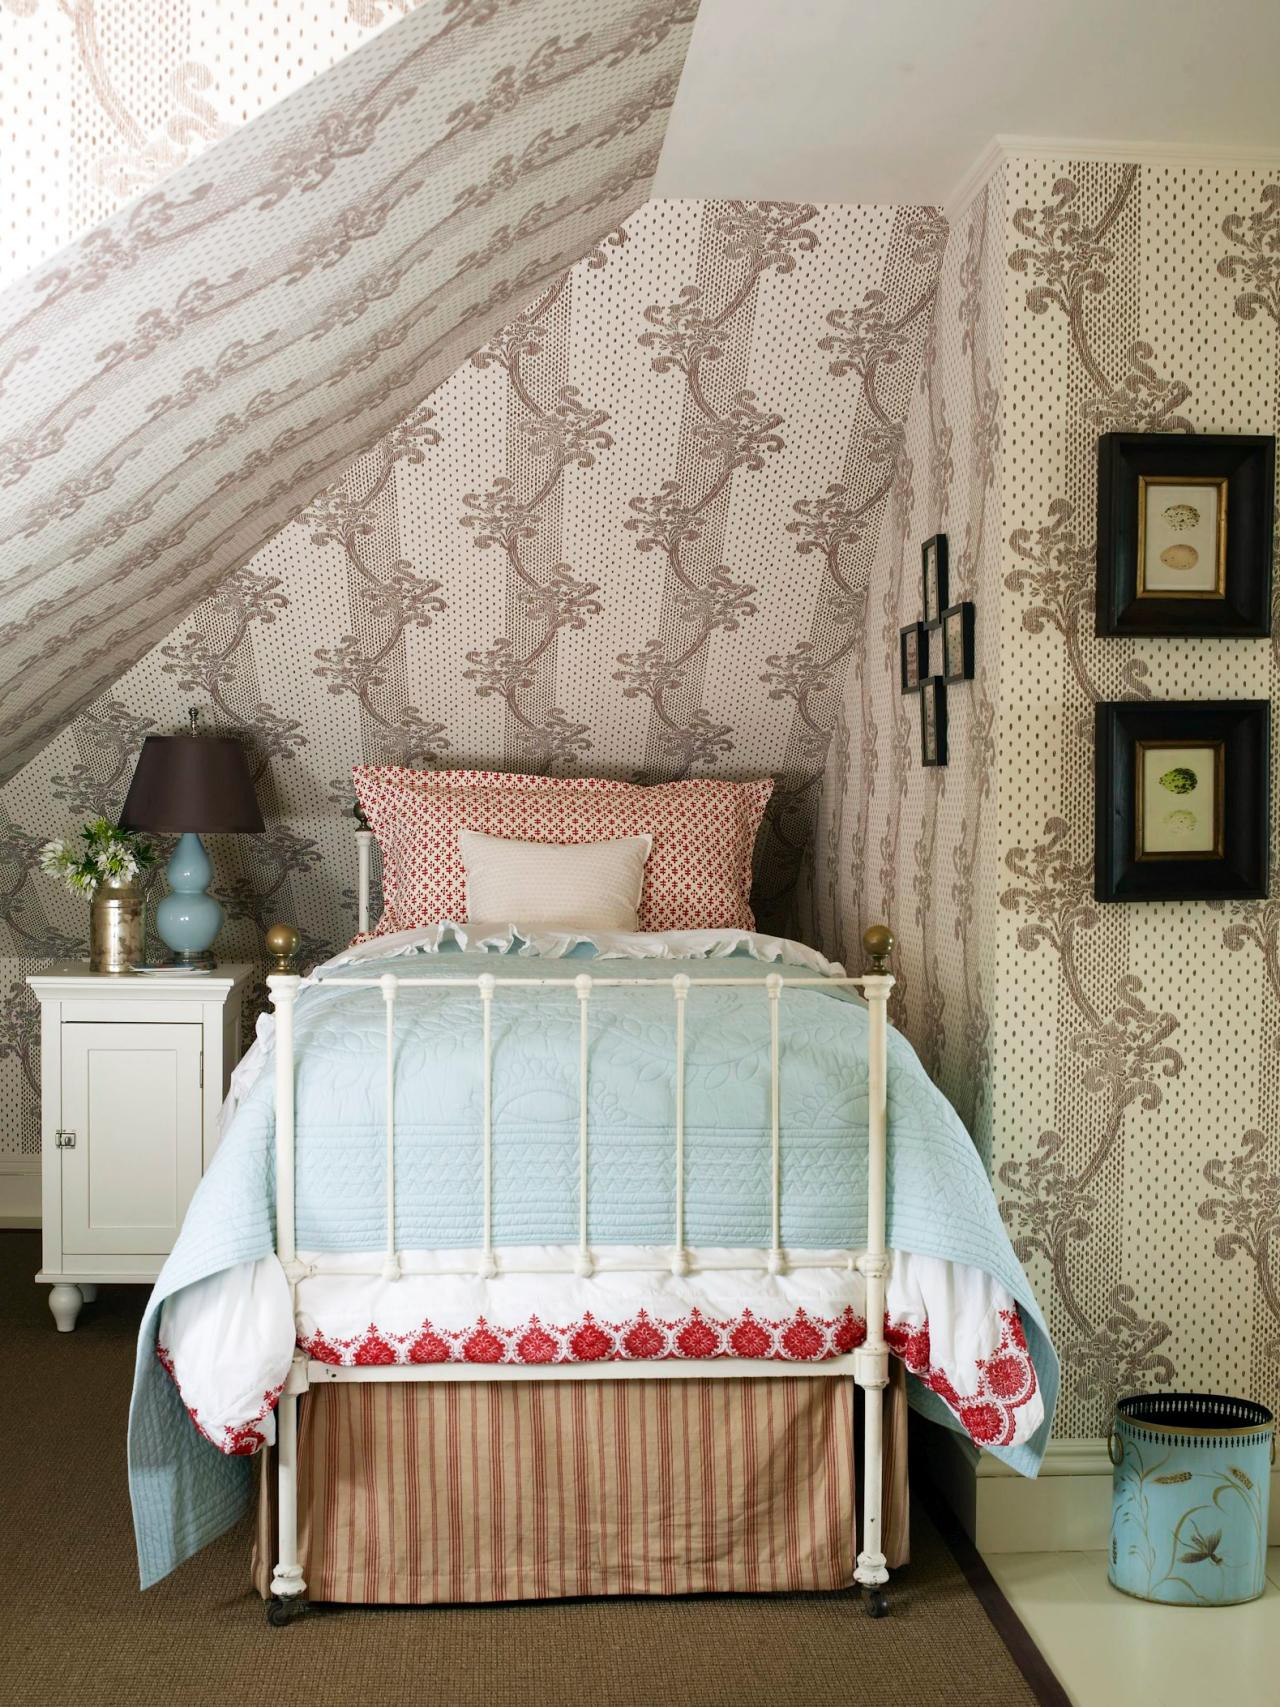 Shabby Chic Bedrooms
 25 Shabby Chic Style Bedroom Design Ideas Decoration Love